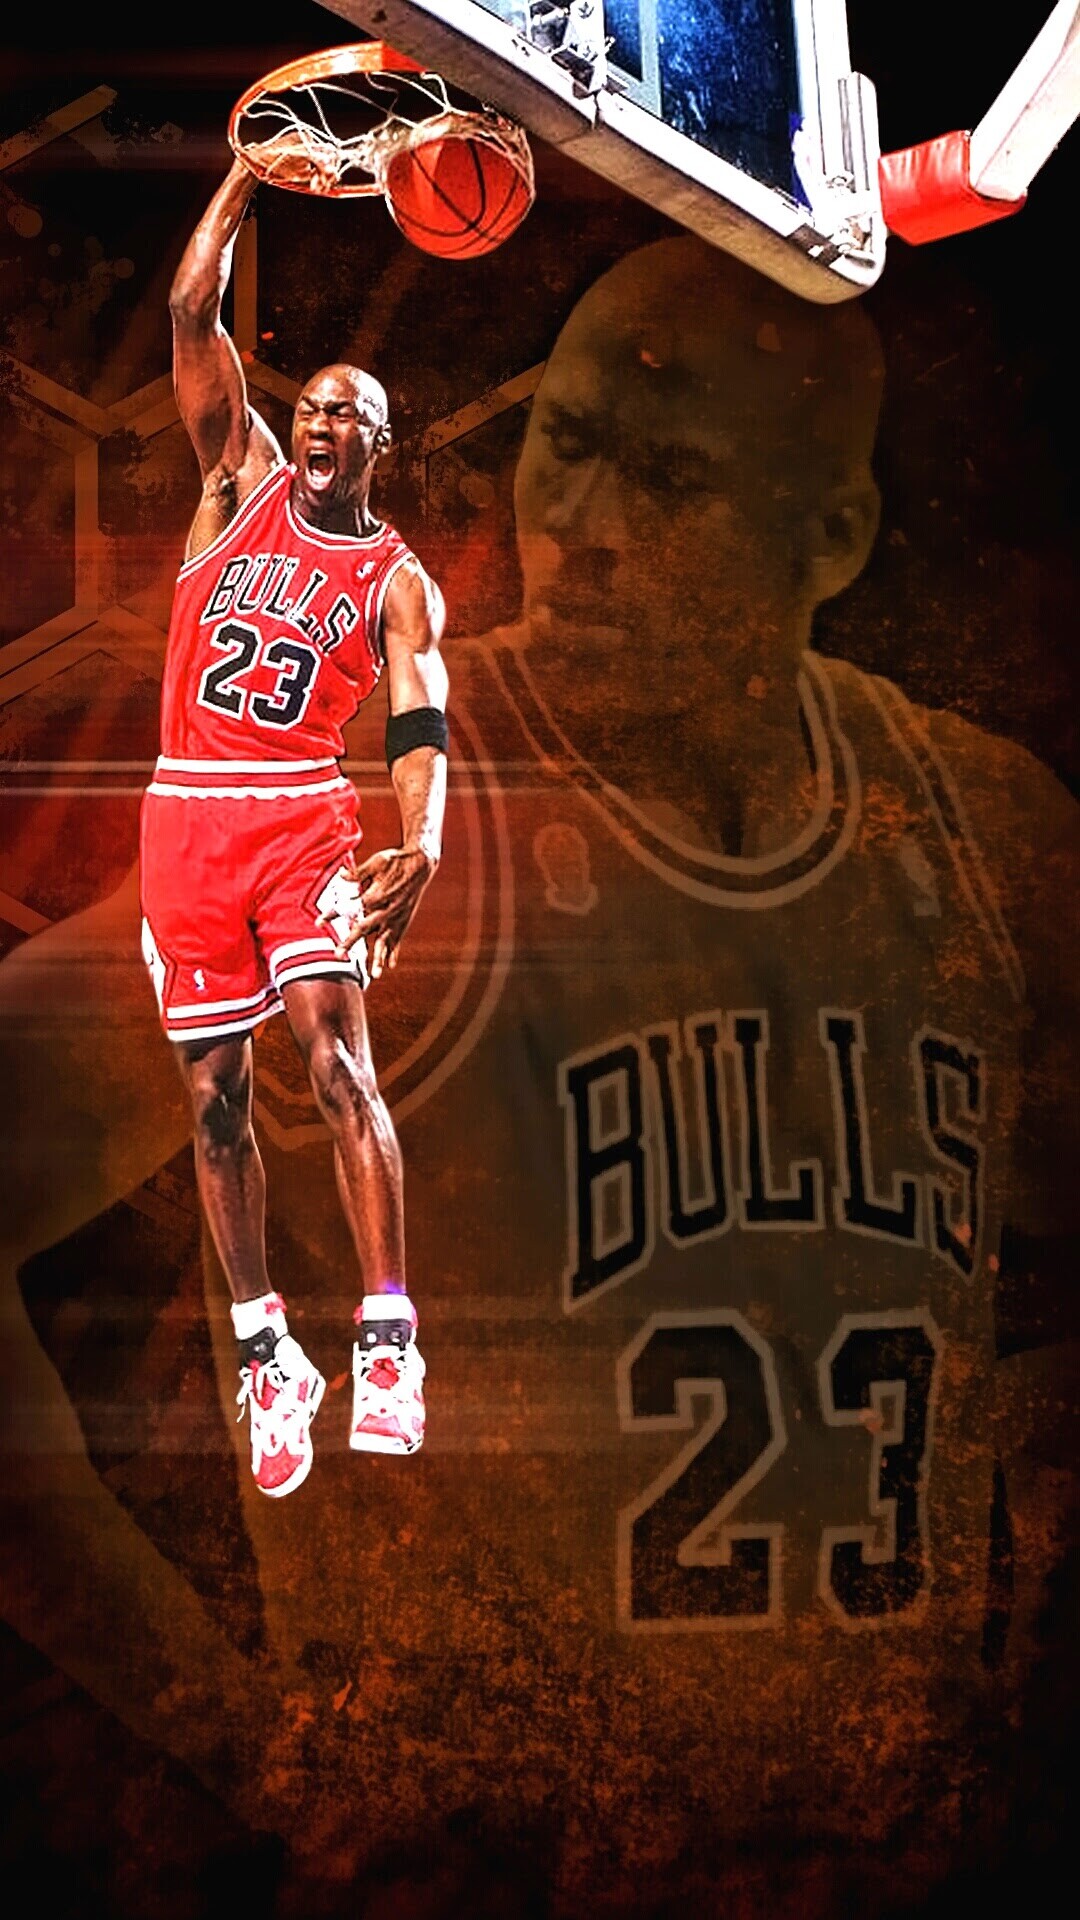 Michael Jordan: Scored a career-high 69 points in a win over the Cavaliers on March 28, 1990. 1080x1920 Full HD Wallpaper.